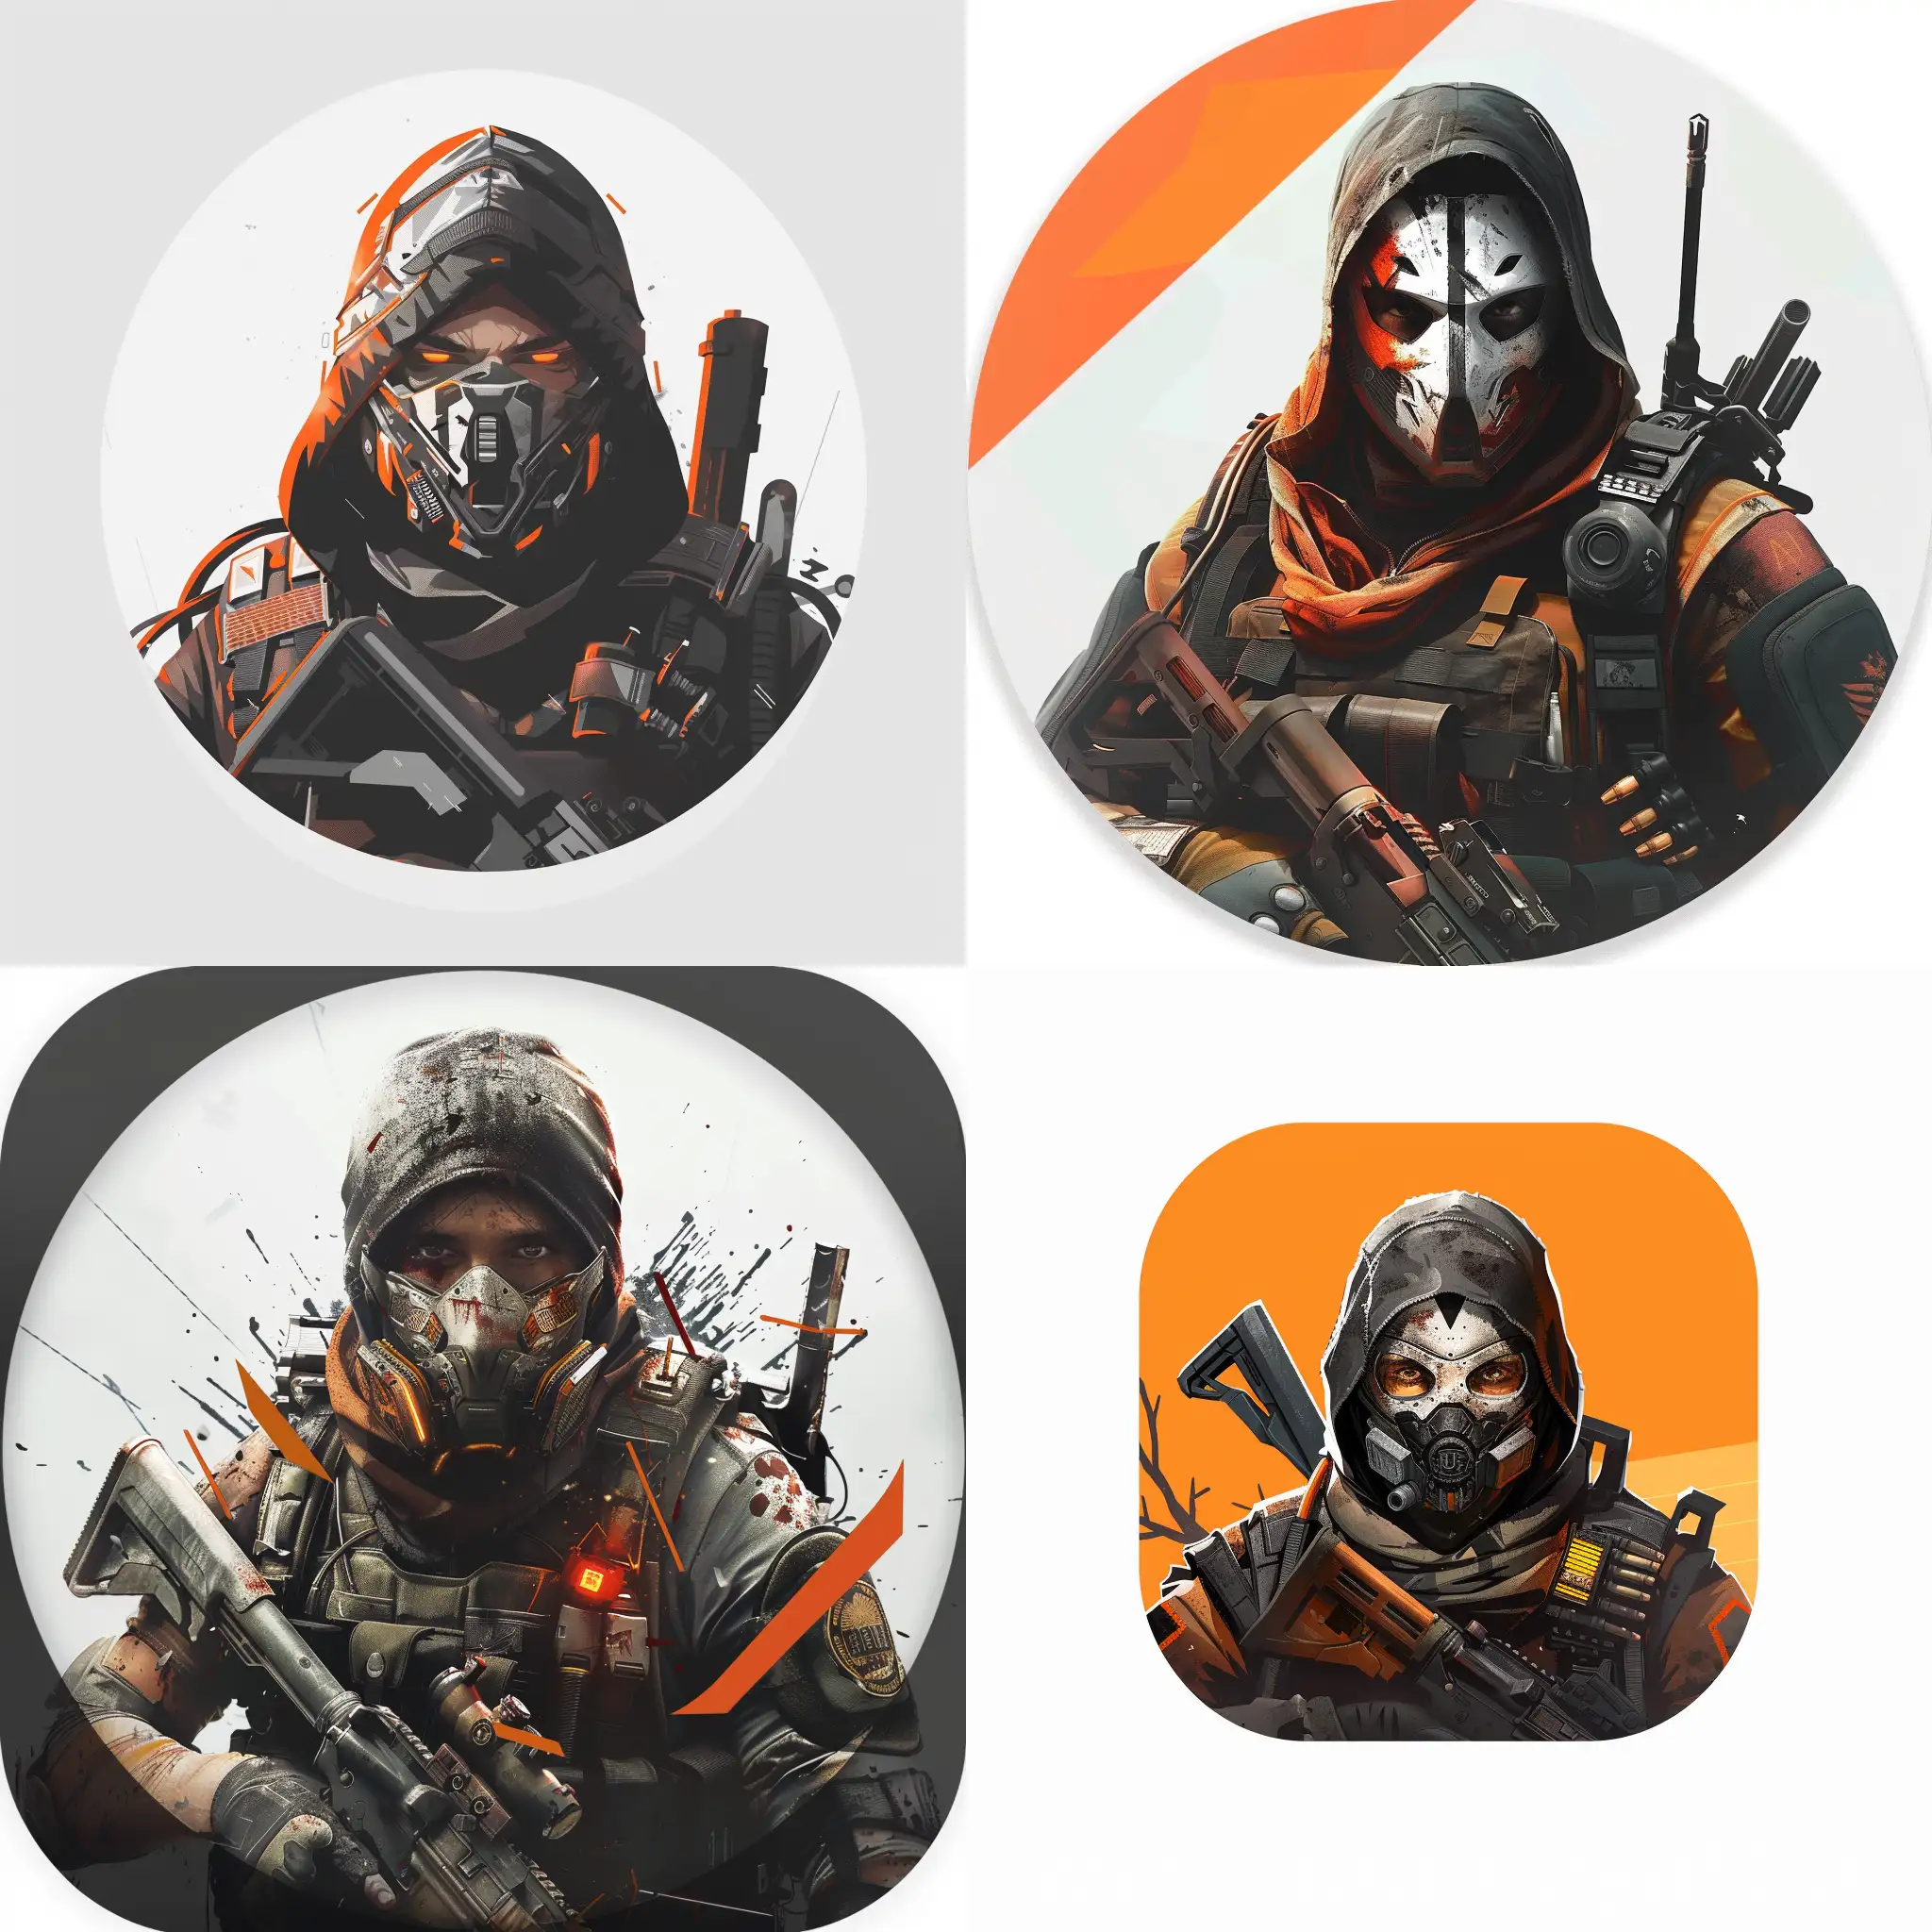 The-Division-2-Recruiter-Gamer-Profile-Logo-with-Hunter-Mask-and-Weapon